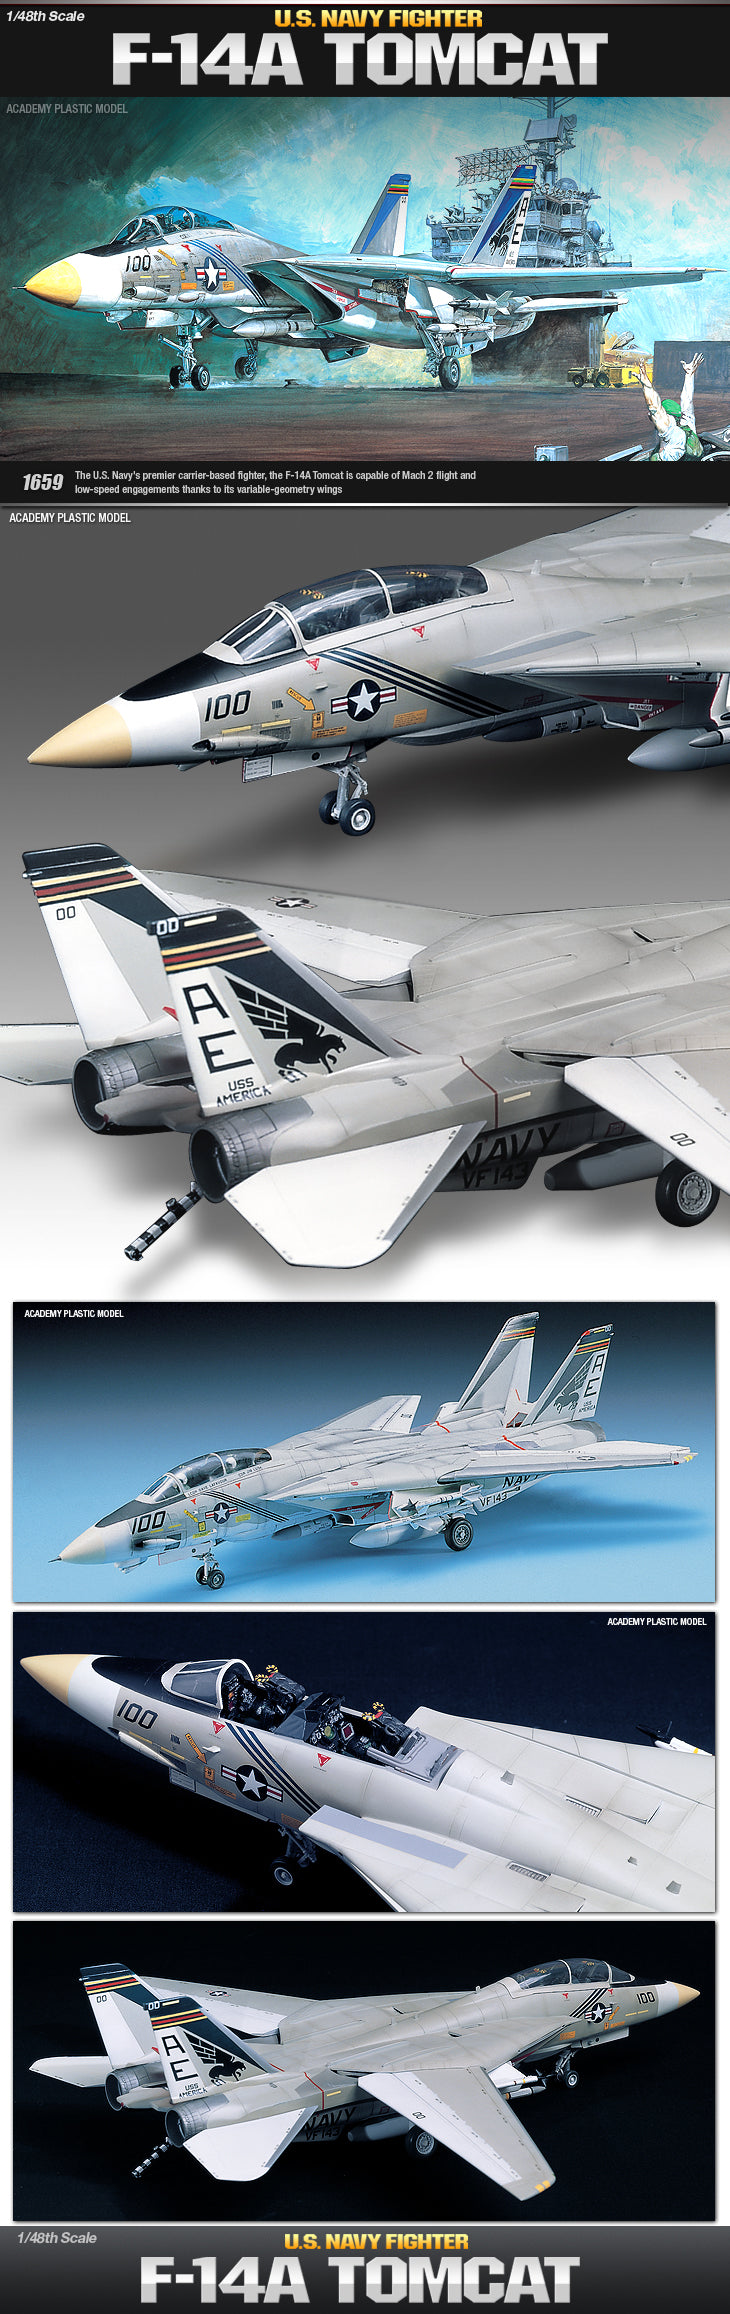 Academy 12253 1:48 F-14A Tomcat US Navy Fighter Airplane Kit